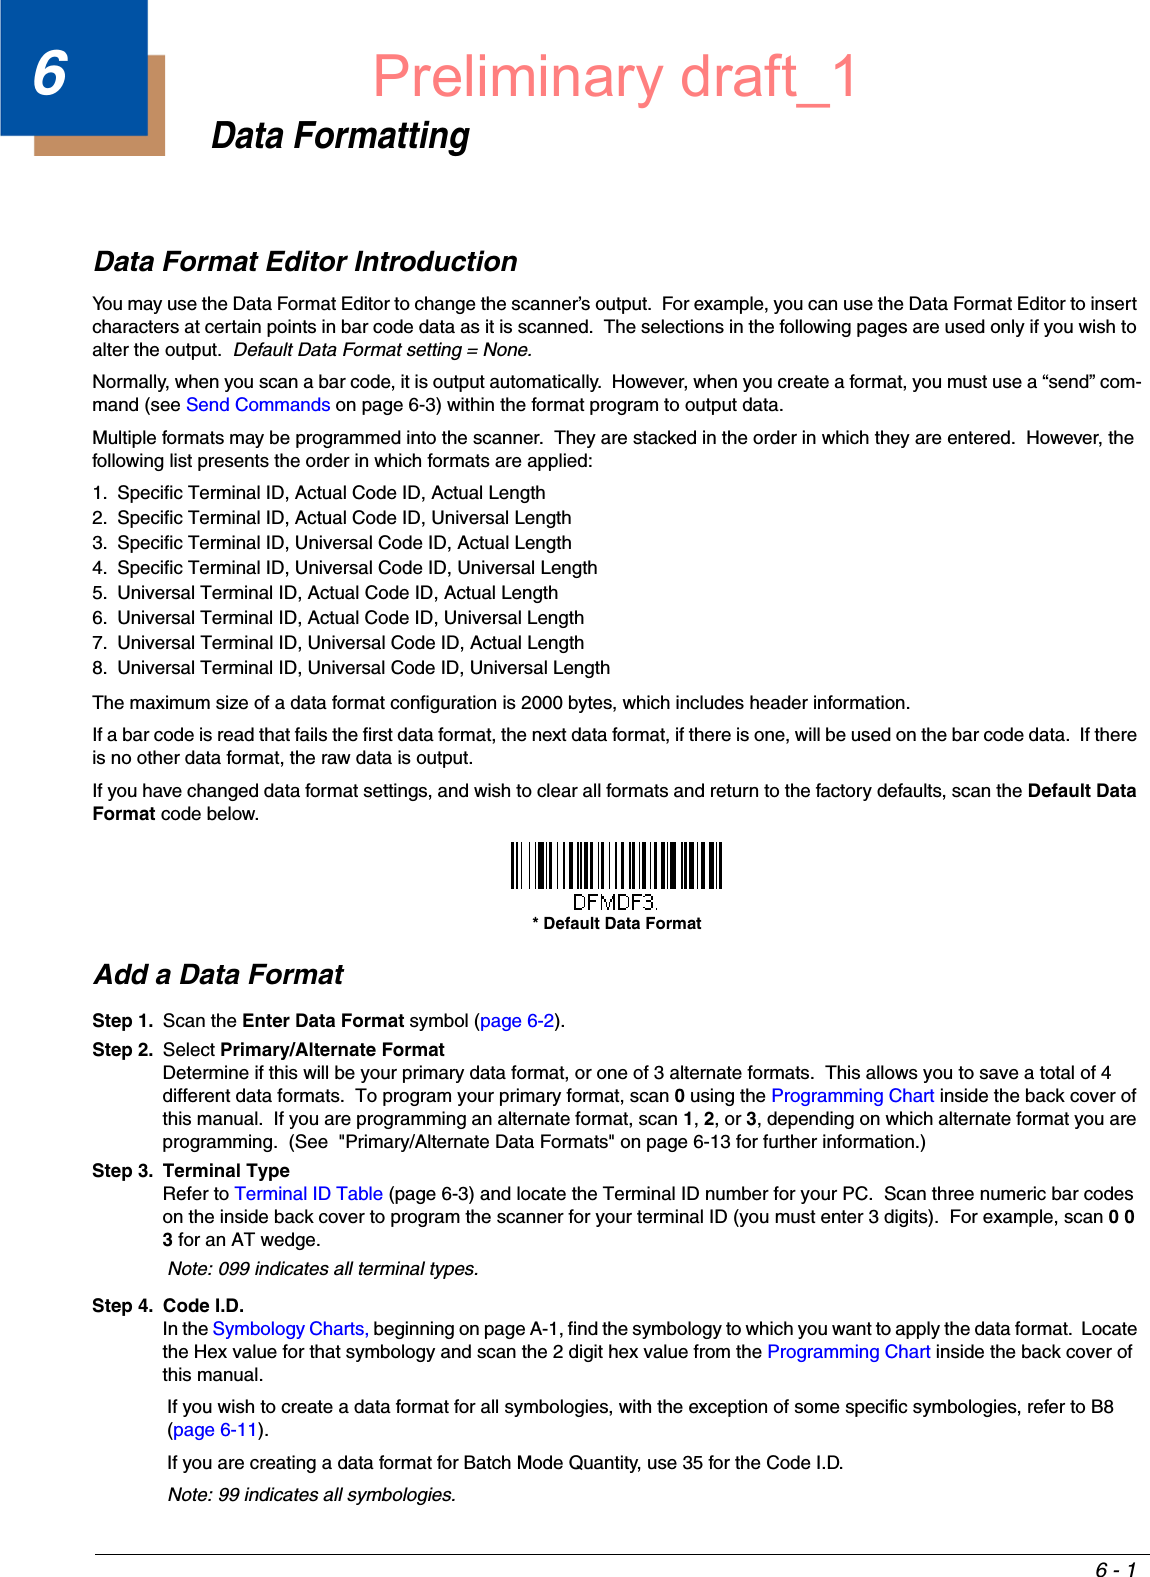 6 - 16Data FormattingData Format Editor IntroductionYou may use the Data Format Editor to change the scanner’s output.  For example, you can use the Data Format Editor to insert characters at certain points in bar code data as it is scanned.  The selections in the following pages are used only if you wish to alter the output.  Default Data Format setting = None.Normally, when you scan a bar code, it is output automatically.  However, when you create a format, you must use a “send” com-mand (see Send Commands on page 6-3) within the format program to output data.Multiple formats may be programmed into the scanner.  They are stacked in the order in which they are entered.  However, the following list presents the order in which formats are applied:1. Specific Terminal ID, Actual Code ID, Actual Length2. Specific Terminal ID, Actual Code ID, Universal Length3. Specific Terminal ID, Universal Code ID, Actual Length4. Specific Terminal ID, Universal Code ID, Universal Length5. Universal Terminal ID, Actual Code ID, Actual Length6. Universal Terminal ID, Actual Code ID, Universal Length7. Universal Terminal ID, Universal Code ID, Actual Length8. Universal Terminal ID, Universal Code ID, Universal LengthThe maximum size of a data format configuration is 2000 bytes, which includes header information.  If a bar code is read that fails the first data format, the next data format, if there is one, will be used on the bar code data.  If there is no other data format, the raw data is output. If you have changed data format settings, and wish to clear all formats and return to the factory defaults, scan the Default Data Format code below.Add a Data FormatStep 1. Scan the Enter Data Format symbol (page 6-2).Step 2. Select Primary/Alternate FormatDetermine if this will be your primary data format, or one of 3 alternate formats.  This allows you to save a total of 4 different data formats.  To program your primary format, scan 0 using the Programming Chart inside the back cover of this manual.  If you are programming an alternate format, scan 1, 2, or 3, depending on which alternate format you are programming.  (See  &quot;Primary/Alternate Data Formats&quot; on page 6-13 for further information.)Step 3. Terminal TypeRefer to Terminal ID Table (page 6-3) and locate the Terminal ID number for your PC.  Scan three numeric bar codes on the inside back cover to program the scanner for your terminal ID (you must enter 3 digits).  For example, scan 0 0 3 for an AT wedge. Note: 099 indicates all terminal types.Step 4. Code I.D.In the Symbology Charts, beginning on page A-1, find the symbology to which you want to apply the data format.  Locate the Hex value for that symbology and scan the 2 digit hex value from the Programming Chart inside the back cover of this manual.If you wish to create a data format for all symbologies, with the exception of some specific symbologies, refer to B8 (page 6-11).If you are creating a data format for Batch Mode Quantity, use 35 for the Code I.D.Note: 99 indicates all symbologies.* Default Data FormatPreliminary draft_1